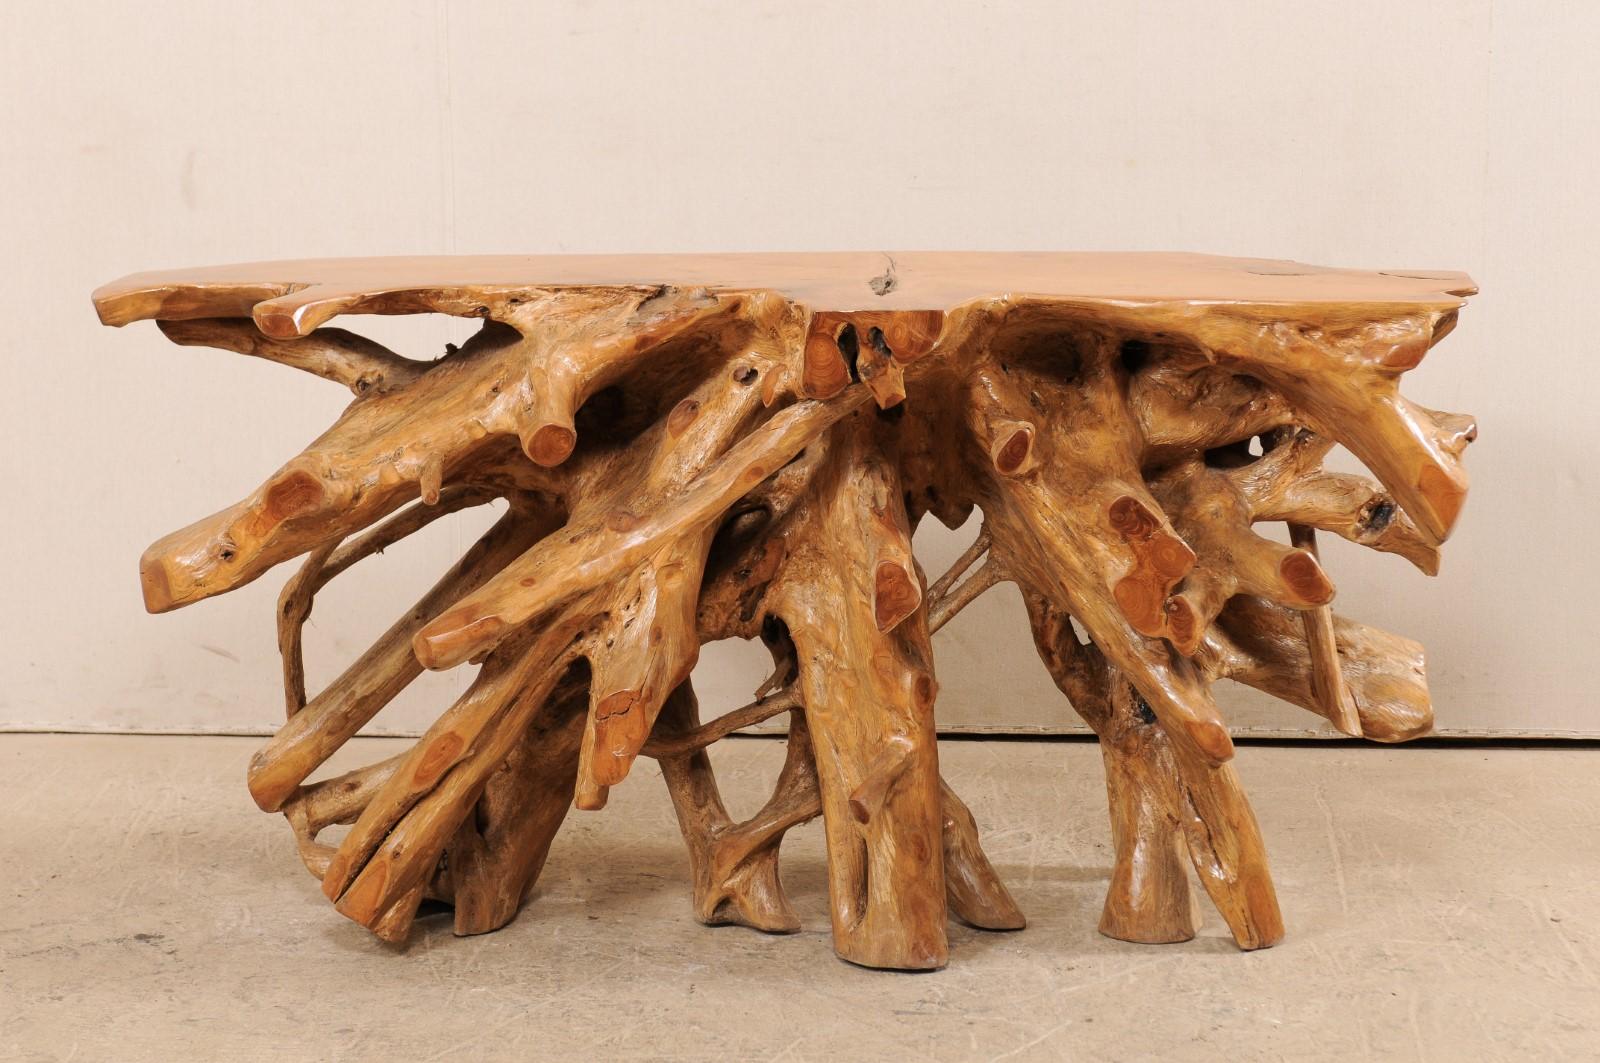 A natural teak tree root console table. This wooden console table has been custom fashioned from a large cut section of old teak whose intertwining roots give it an organic and airy feel. There is a nice contrast of colors and wonderful showing of